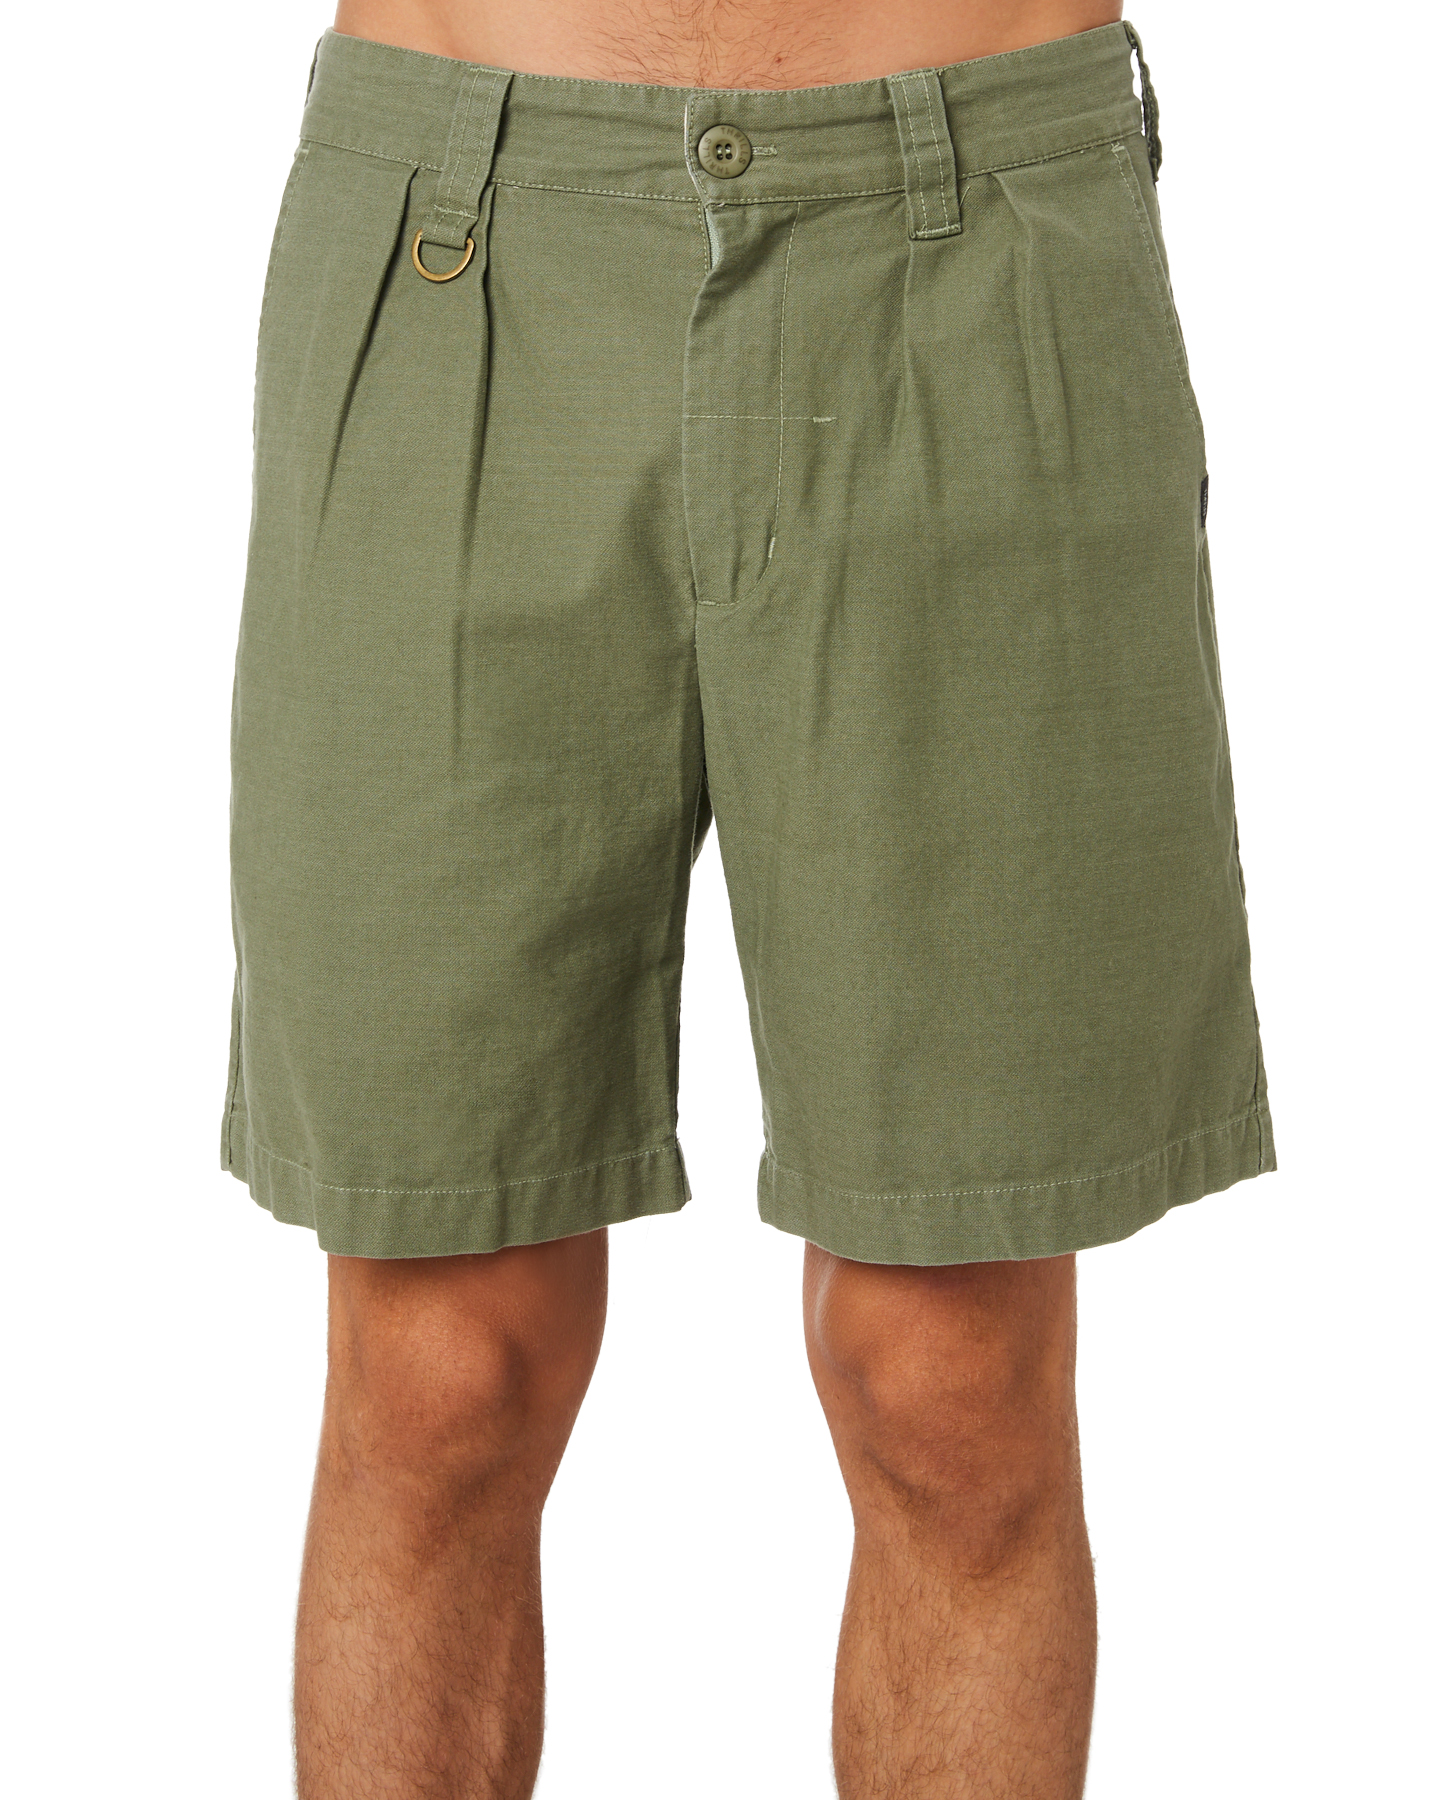 Thrills Deploy Pleated Military Mens Short - Jungle Army | SurfStitch